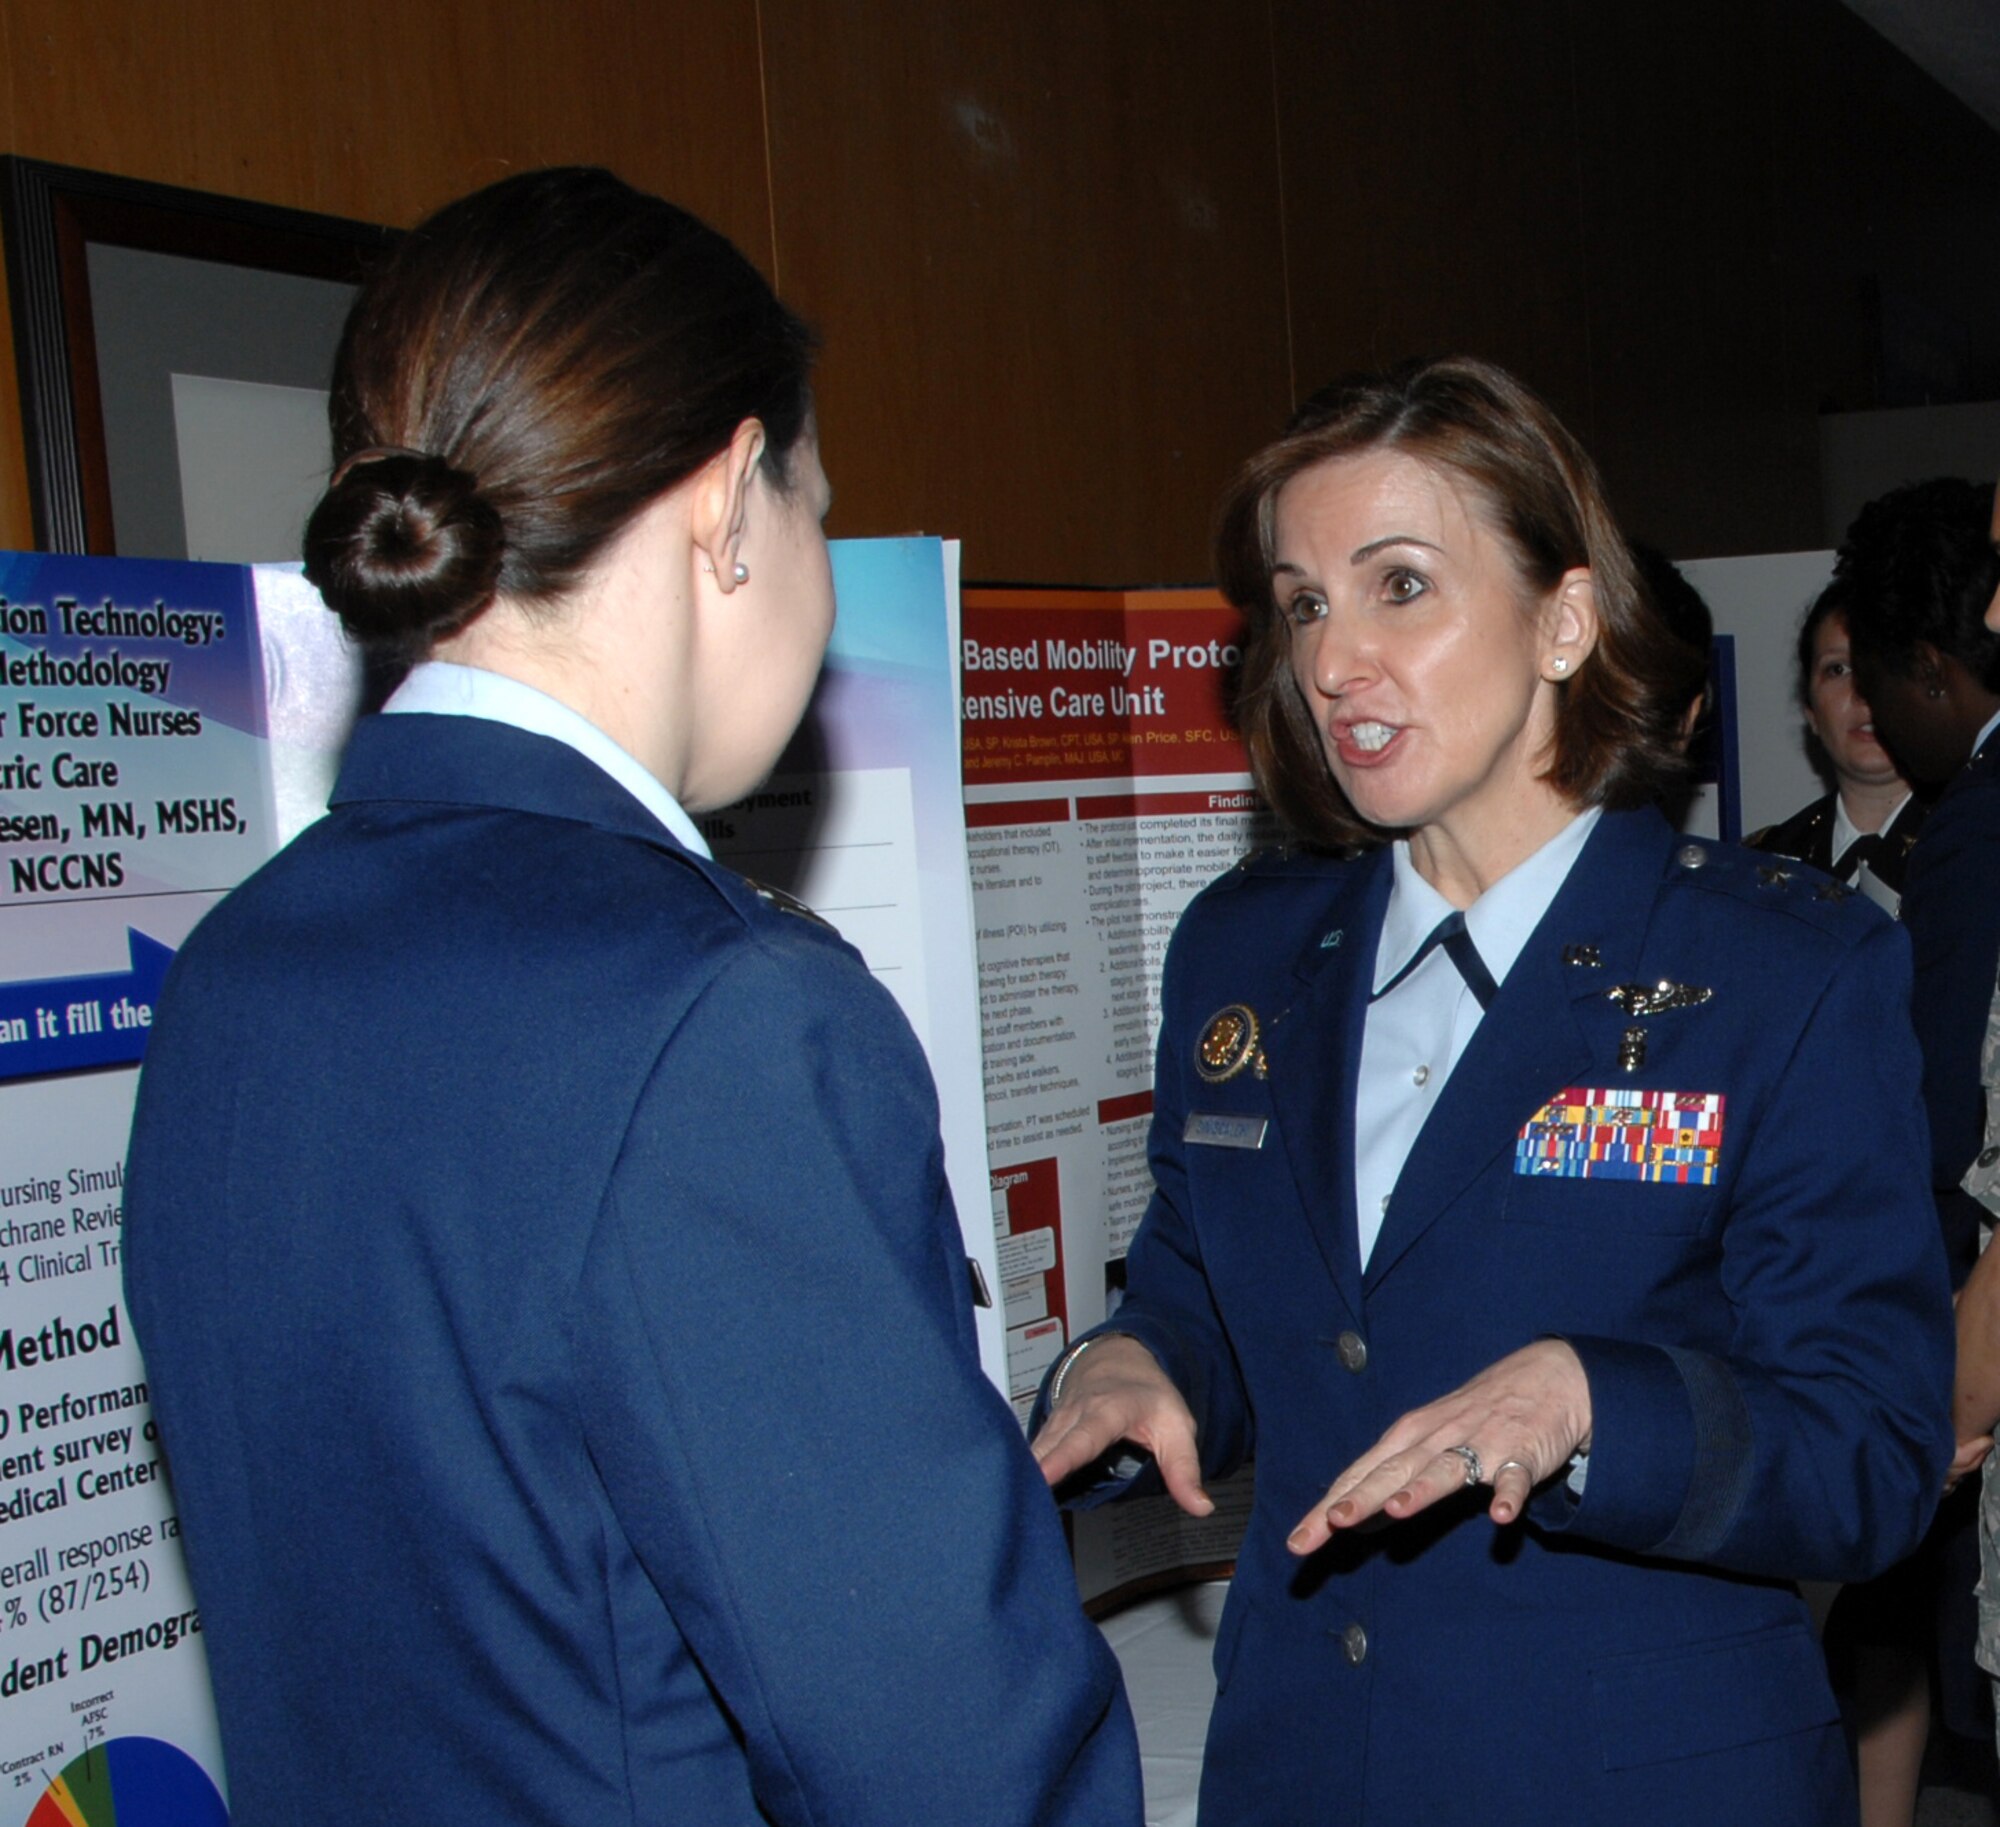 Maj. Gen. Kimberly Siniscalchi (center) speaks with Capt. Stacy Friesen about her poster presentation during the 59th Medical Wing second annual Nursing Research Day Jan. 27, 2012, at Wilford Hall Ambulatory Surgical Center, Lackland Air Force Base, Texas. Siniscalchi is assistant Air Force Surgeon General, Medical Force Development, and assistant Air Force Surgeon General, Nursing Services. Friesen is a registered nurse, 59th Medical Inpatient Squadron. (U.S. Air Force photo by Harold China)